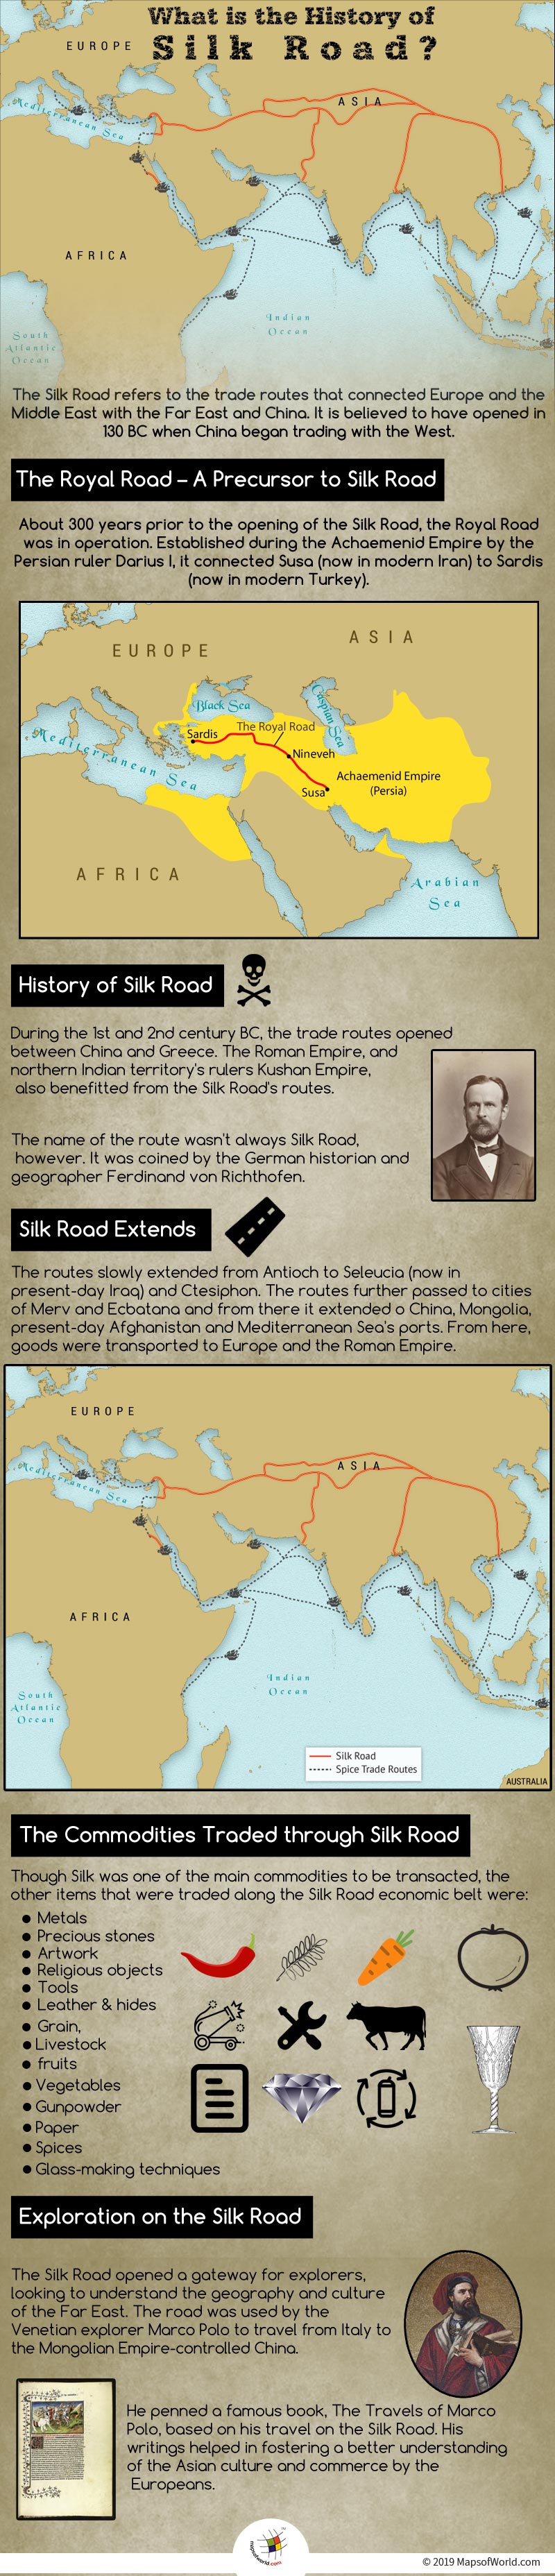 Infographic Showing The History of Silk Road